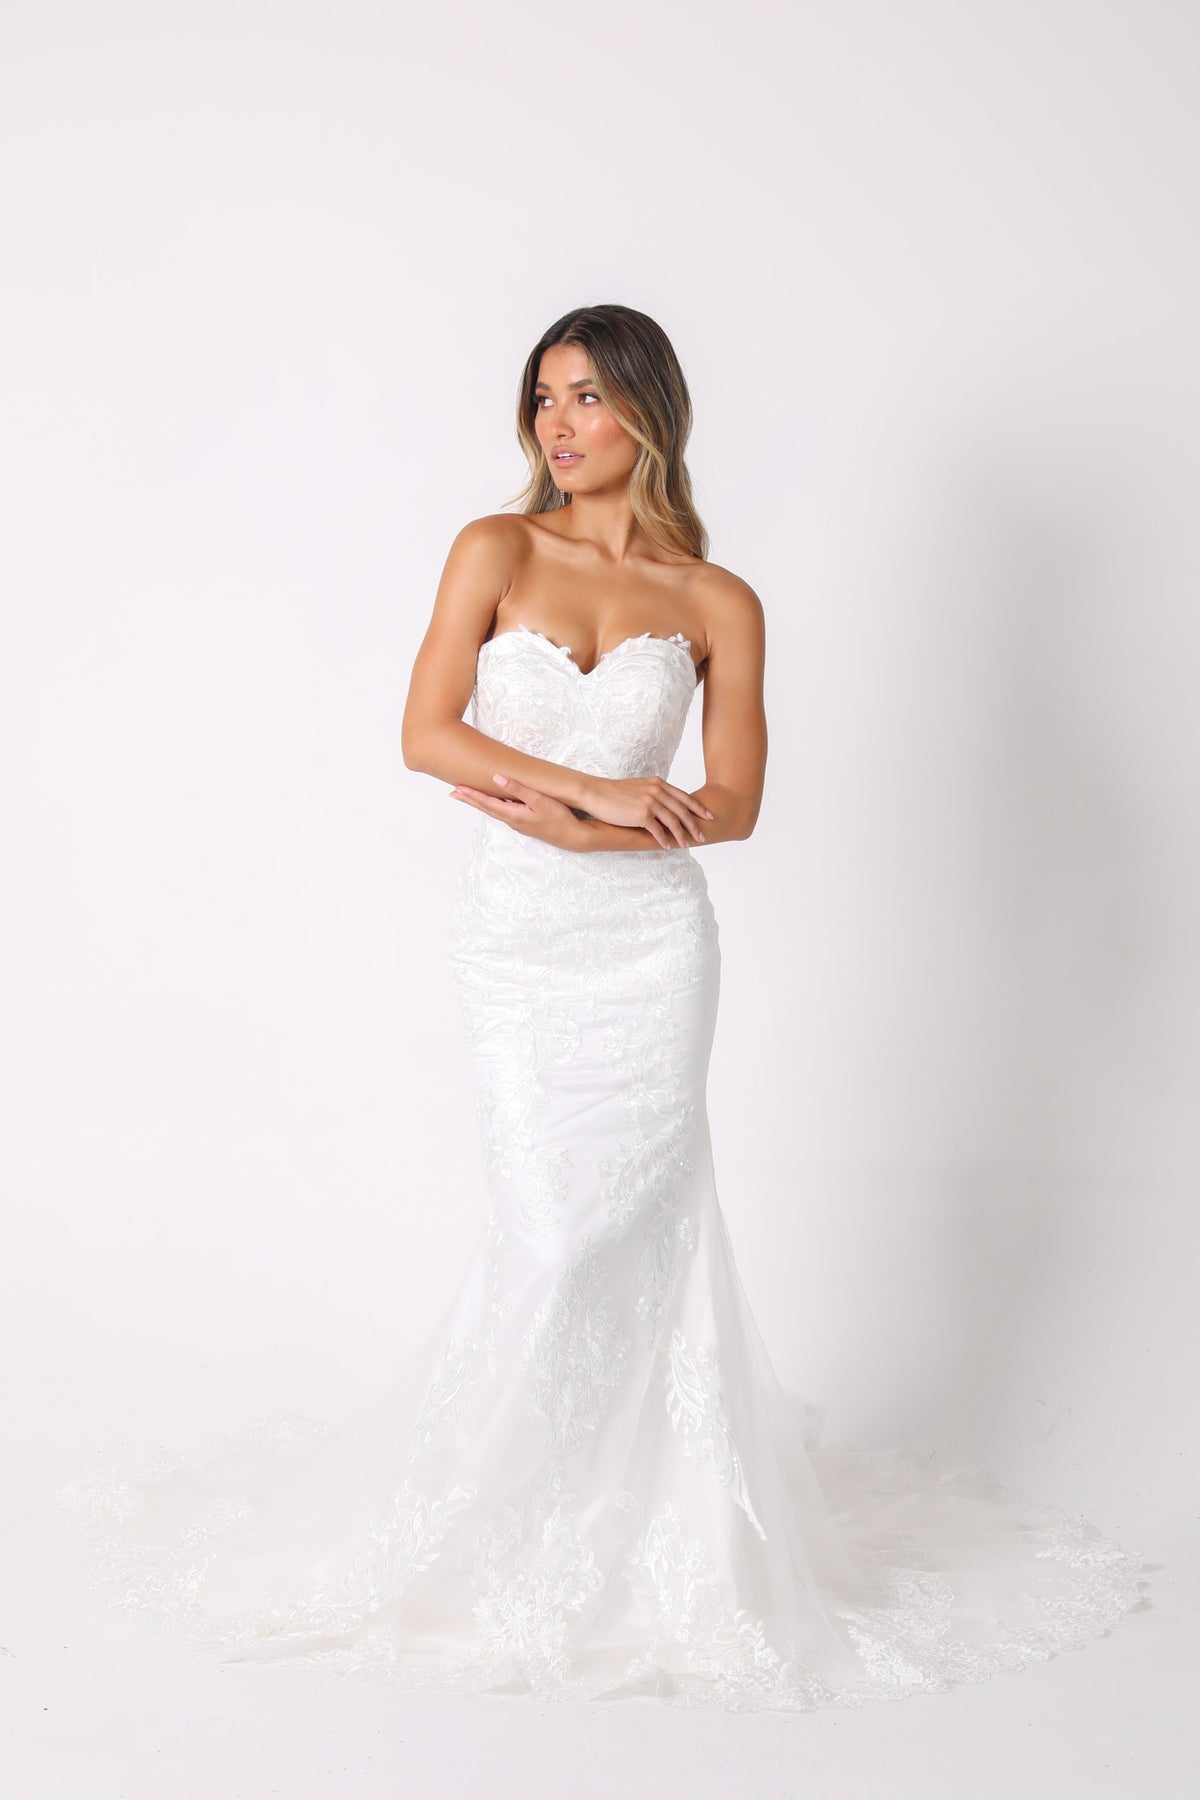 Ivory White Strapless Sweetheart Neck Wedding Gown with Floral Lace Motifs on Tulle